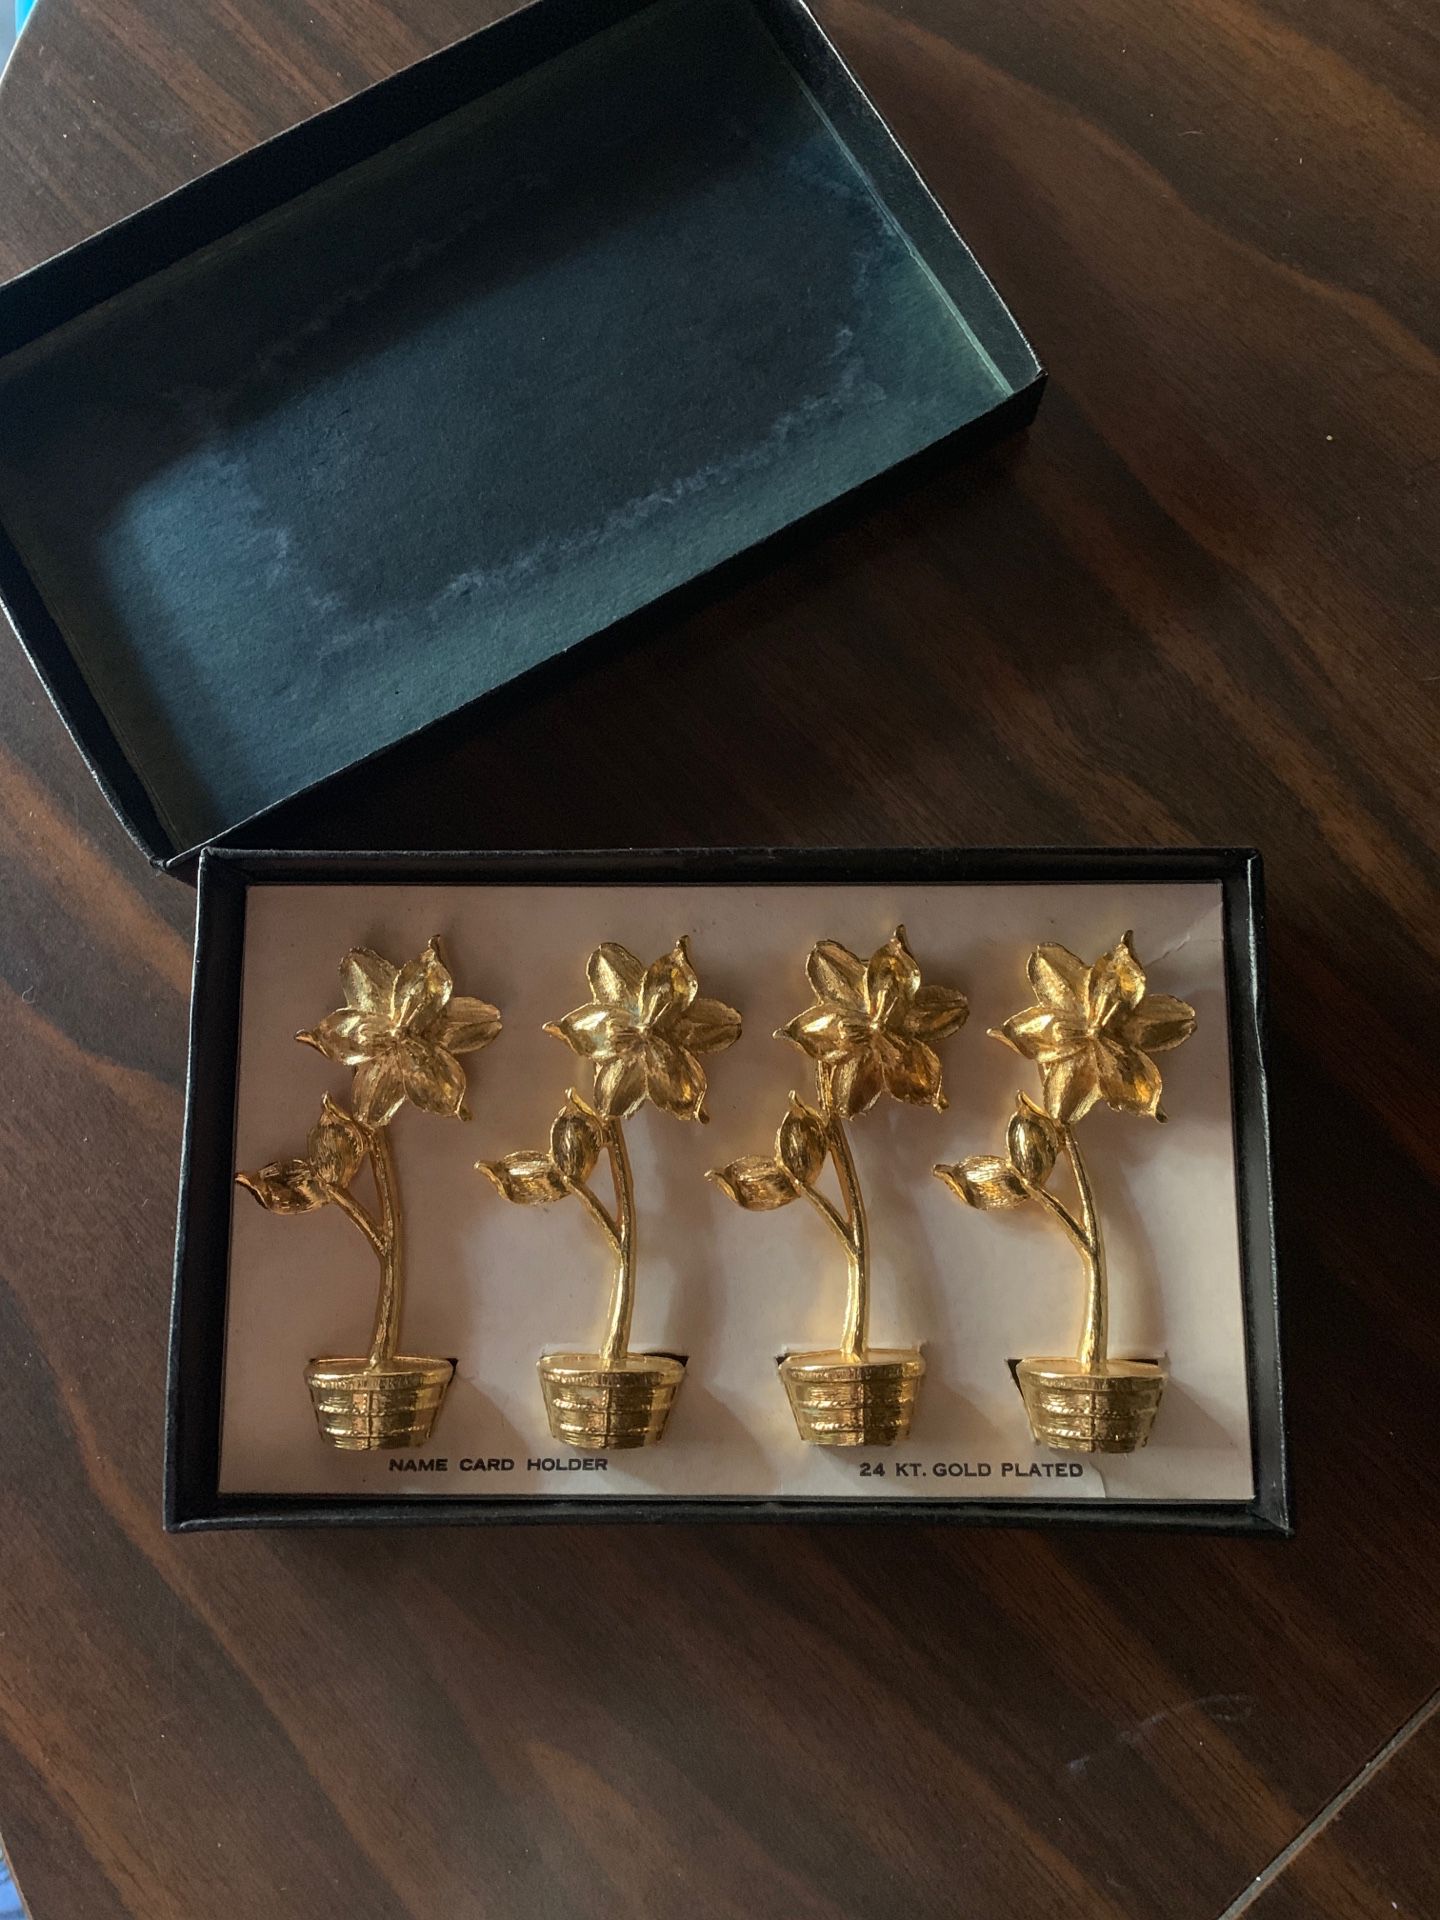 24 kt. Gold plated name card holders